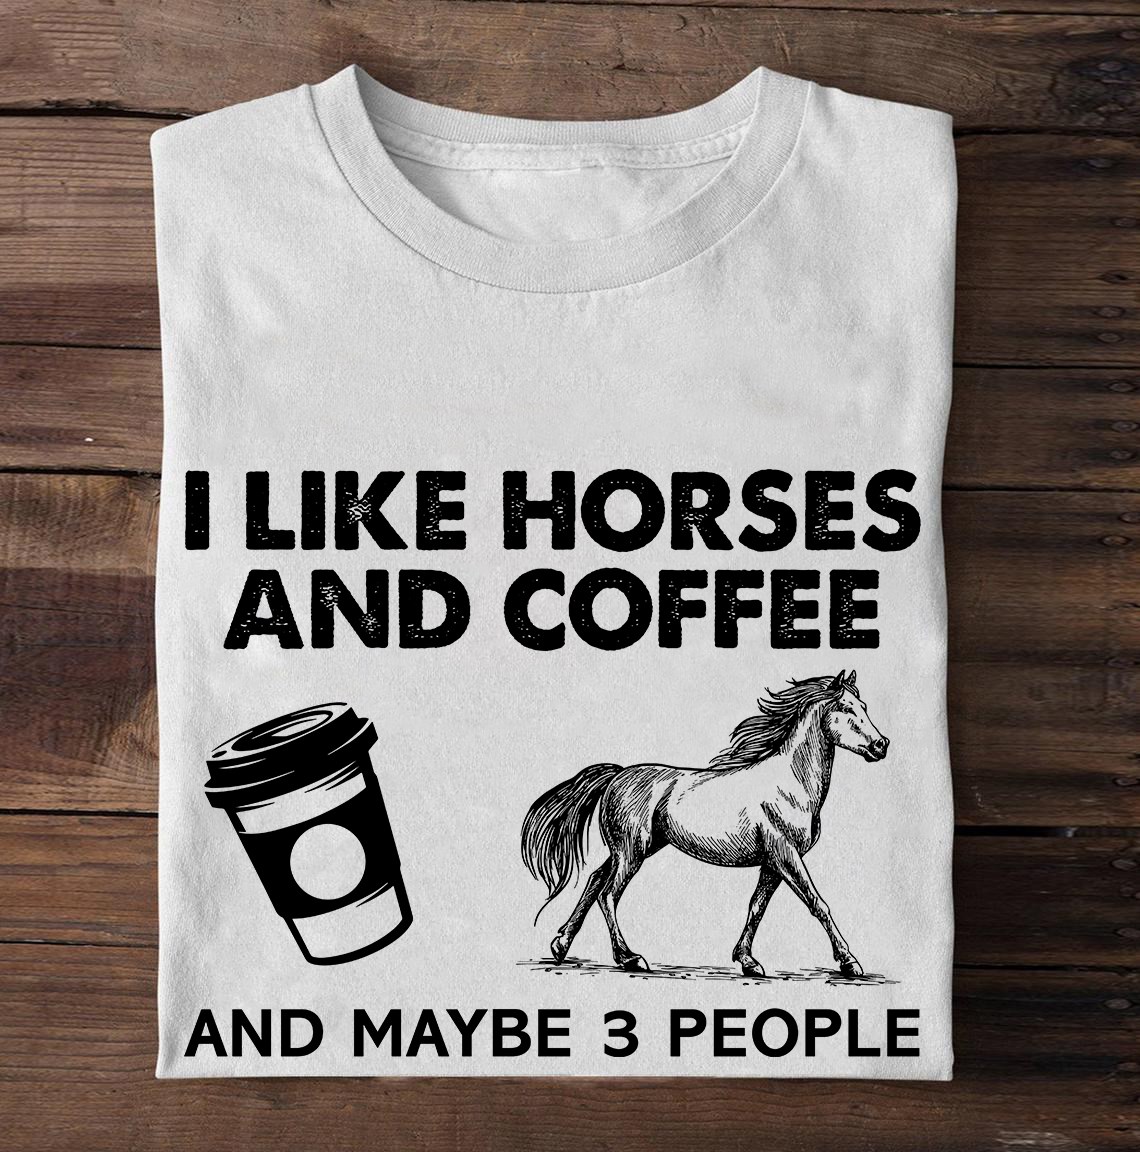 I like horses and coffee and maybe 3 people